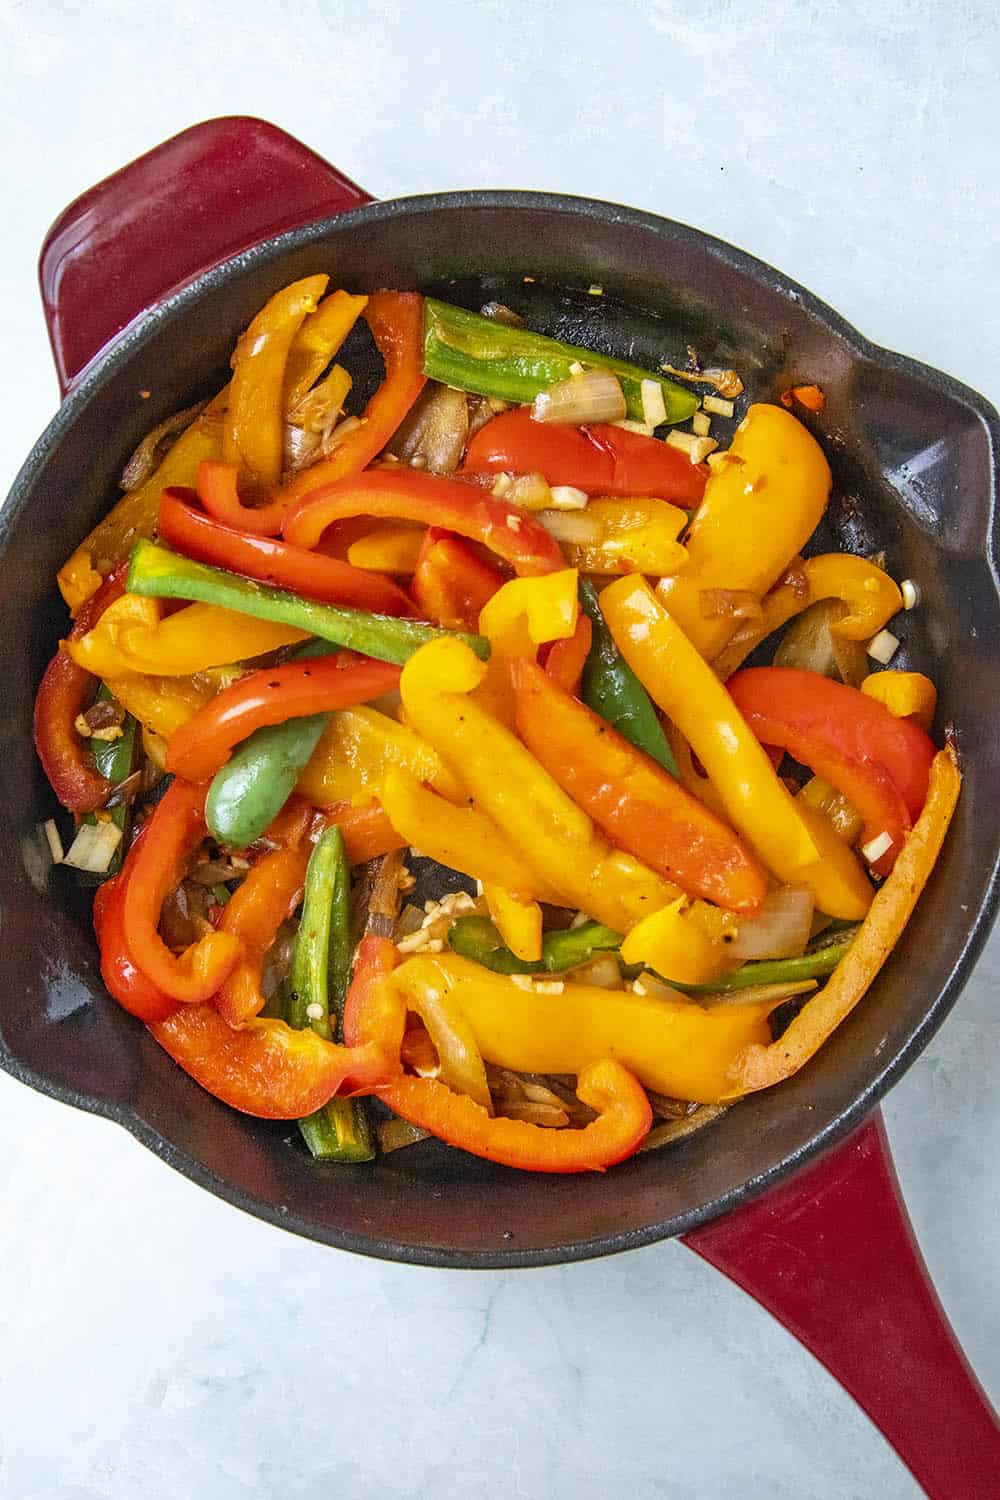 Cooking down the peppers.